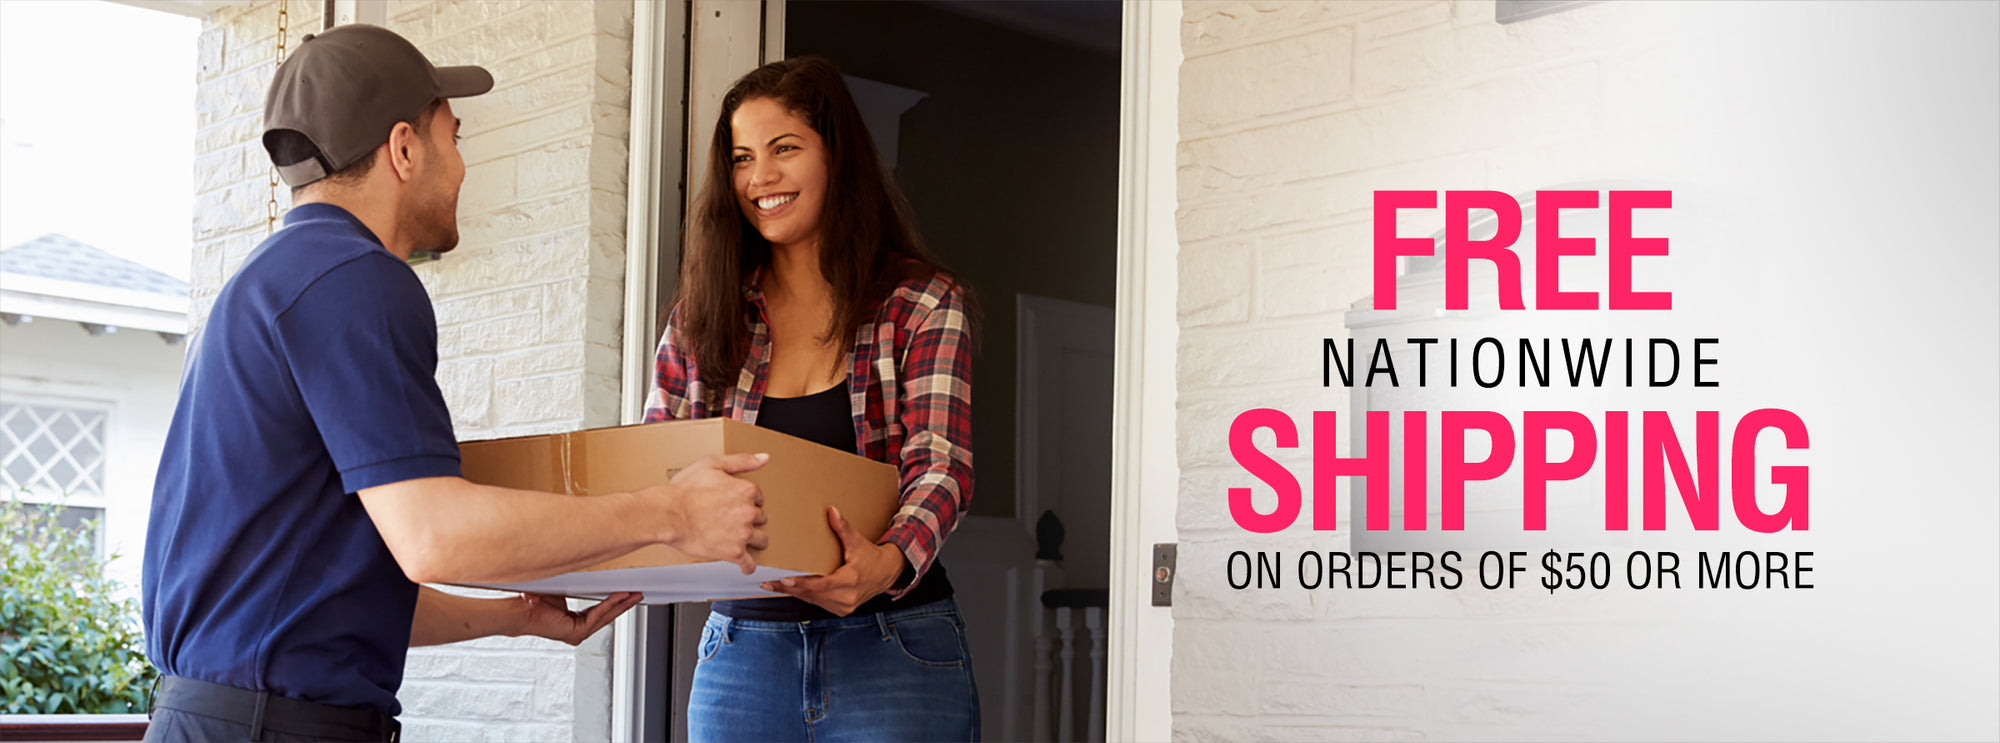 Free Nationwide Shipping on orders of $50 or more